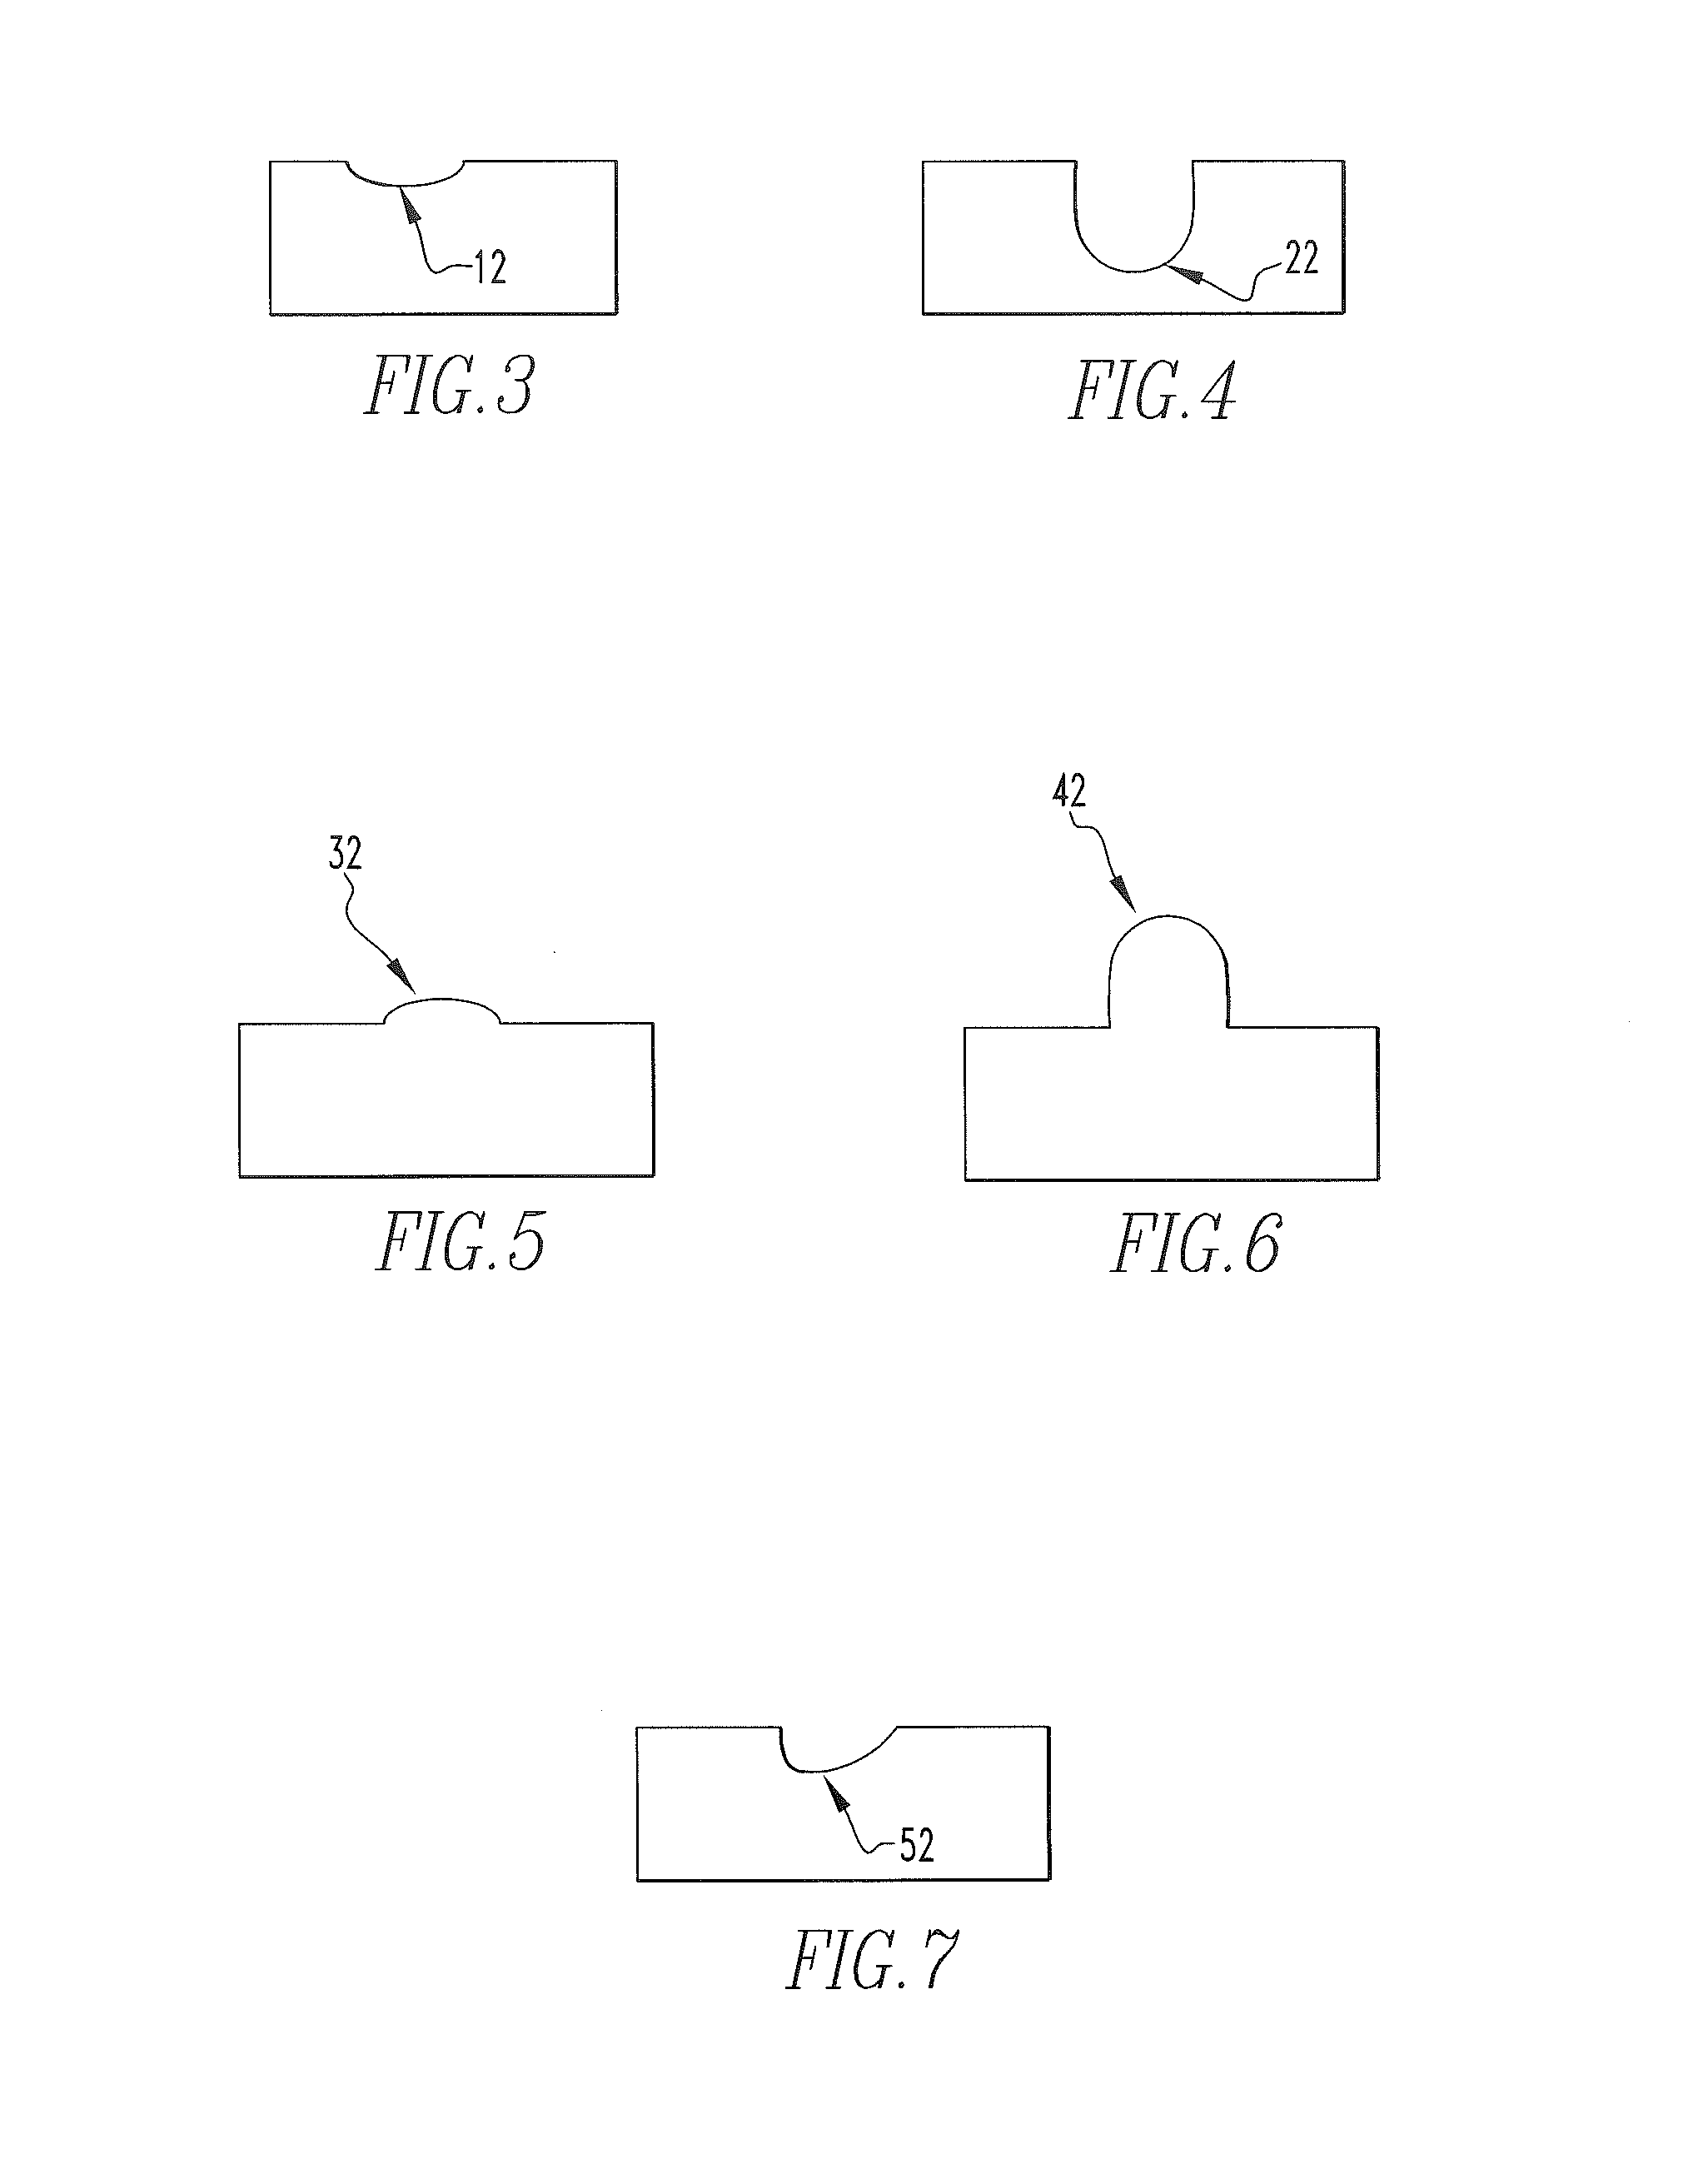 Optically variable device exhibiting non-diffractive three-dimensional optical effect